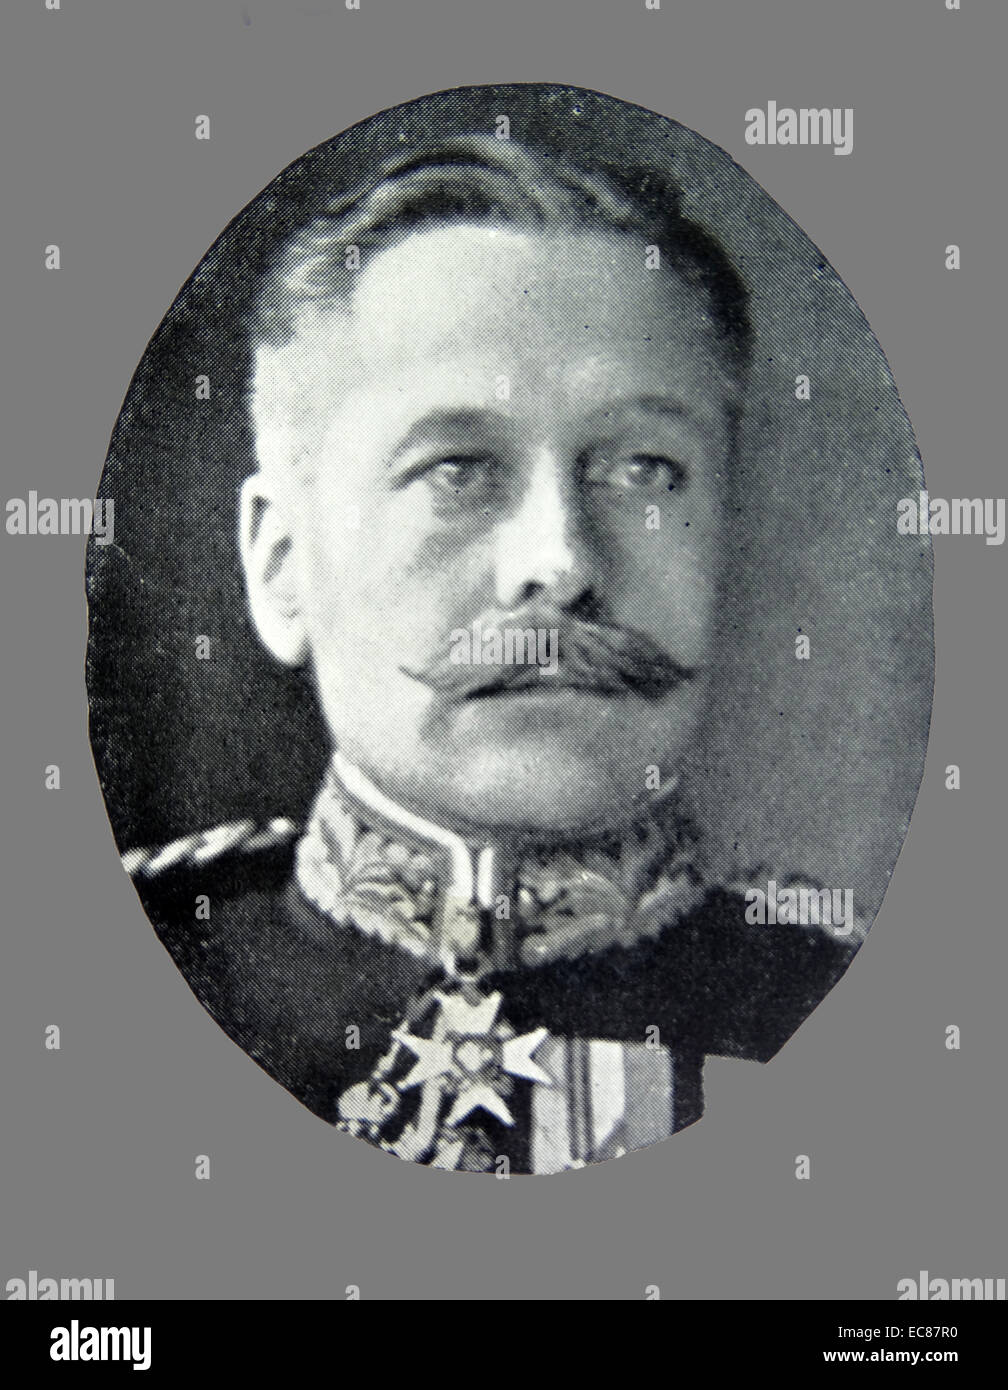 Photograph of Field Marshal Douglas Haig, 1st Earl Haig (1861-1928) British senior officer during the First World War. Commander of the British Expeditionary Force. Dated 1915 Stock Photo